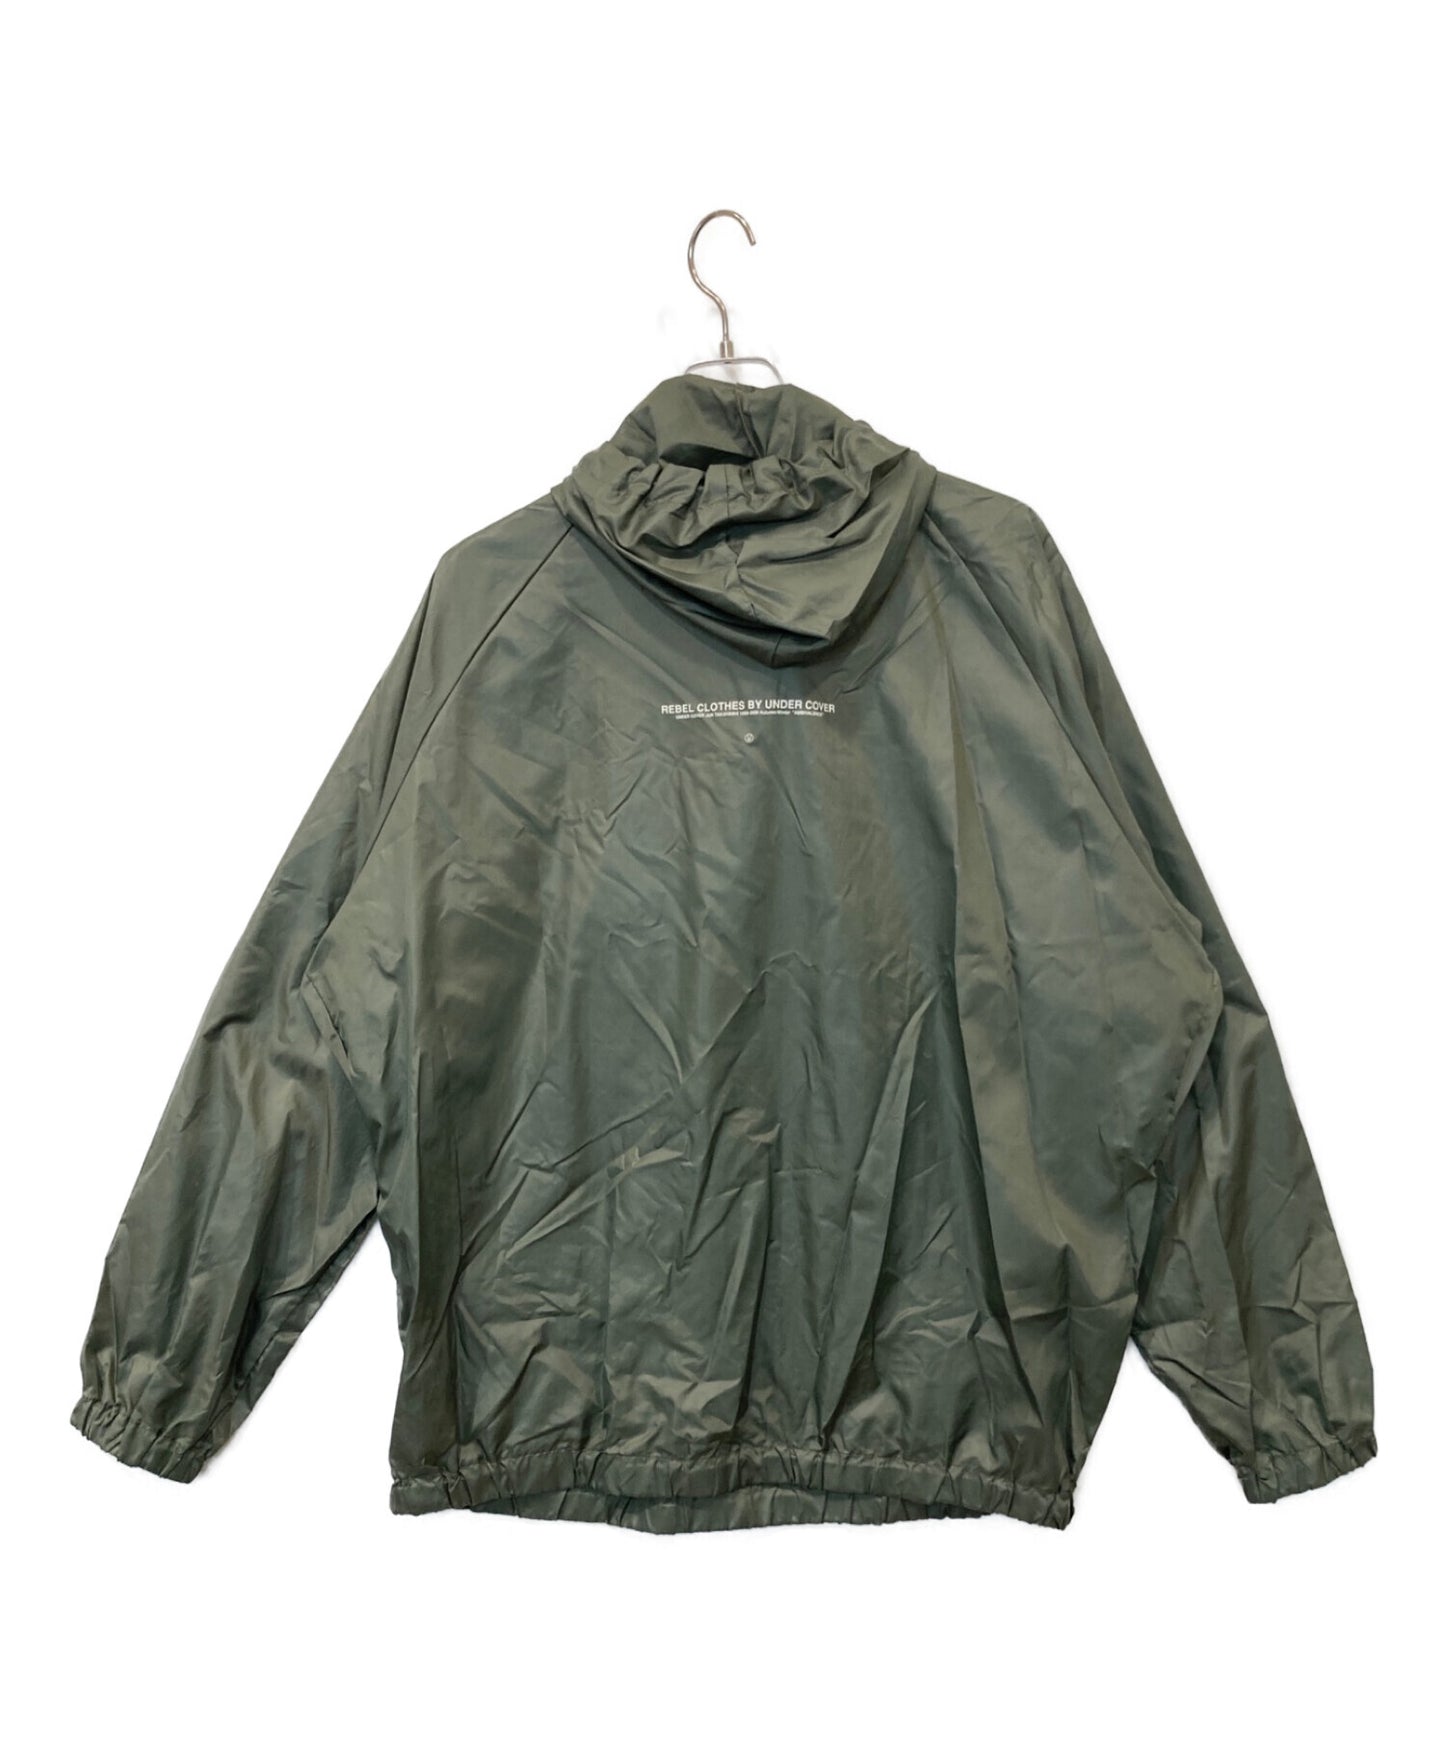 Undercover Old] Anorak Parka